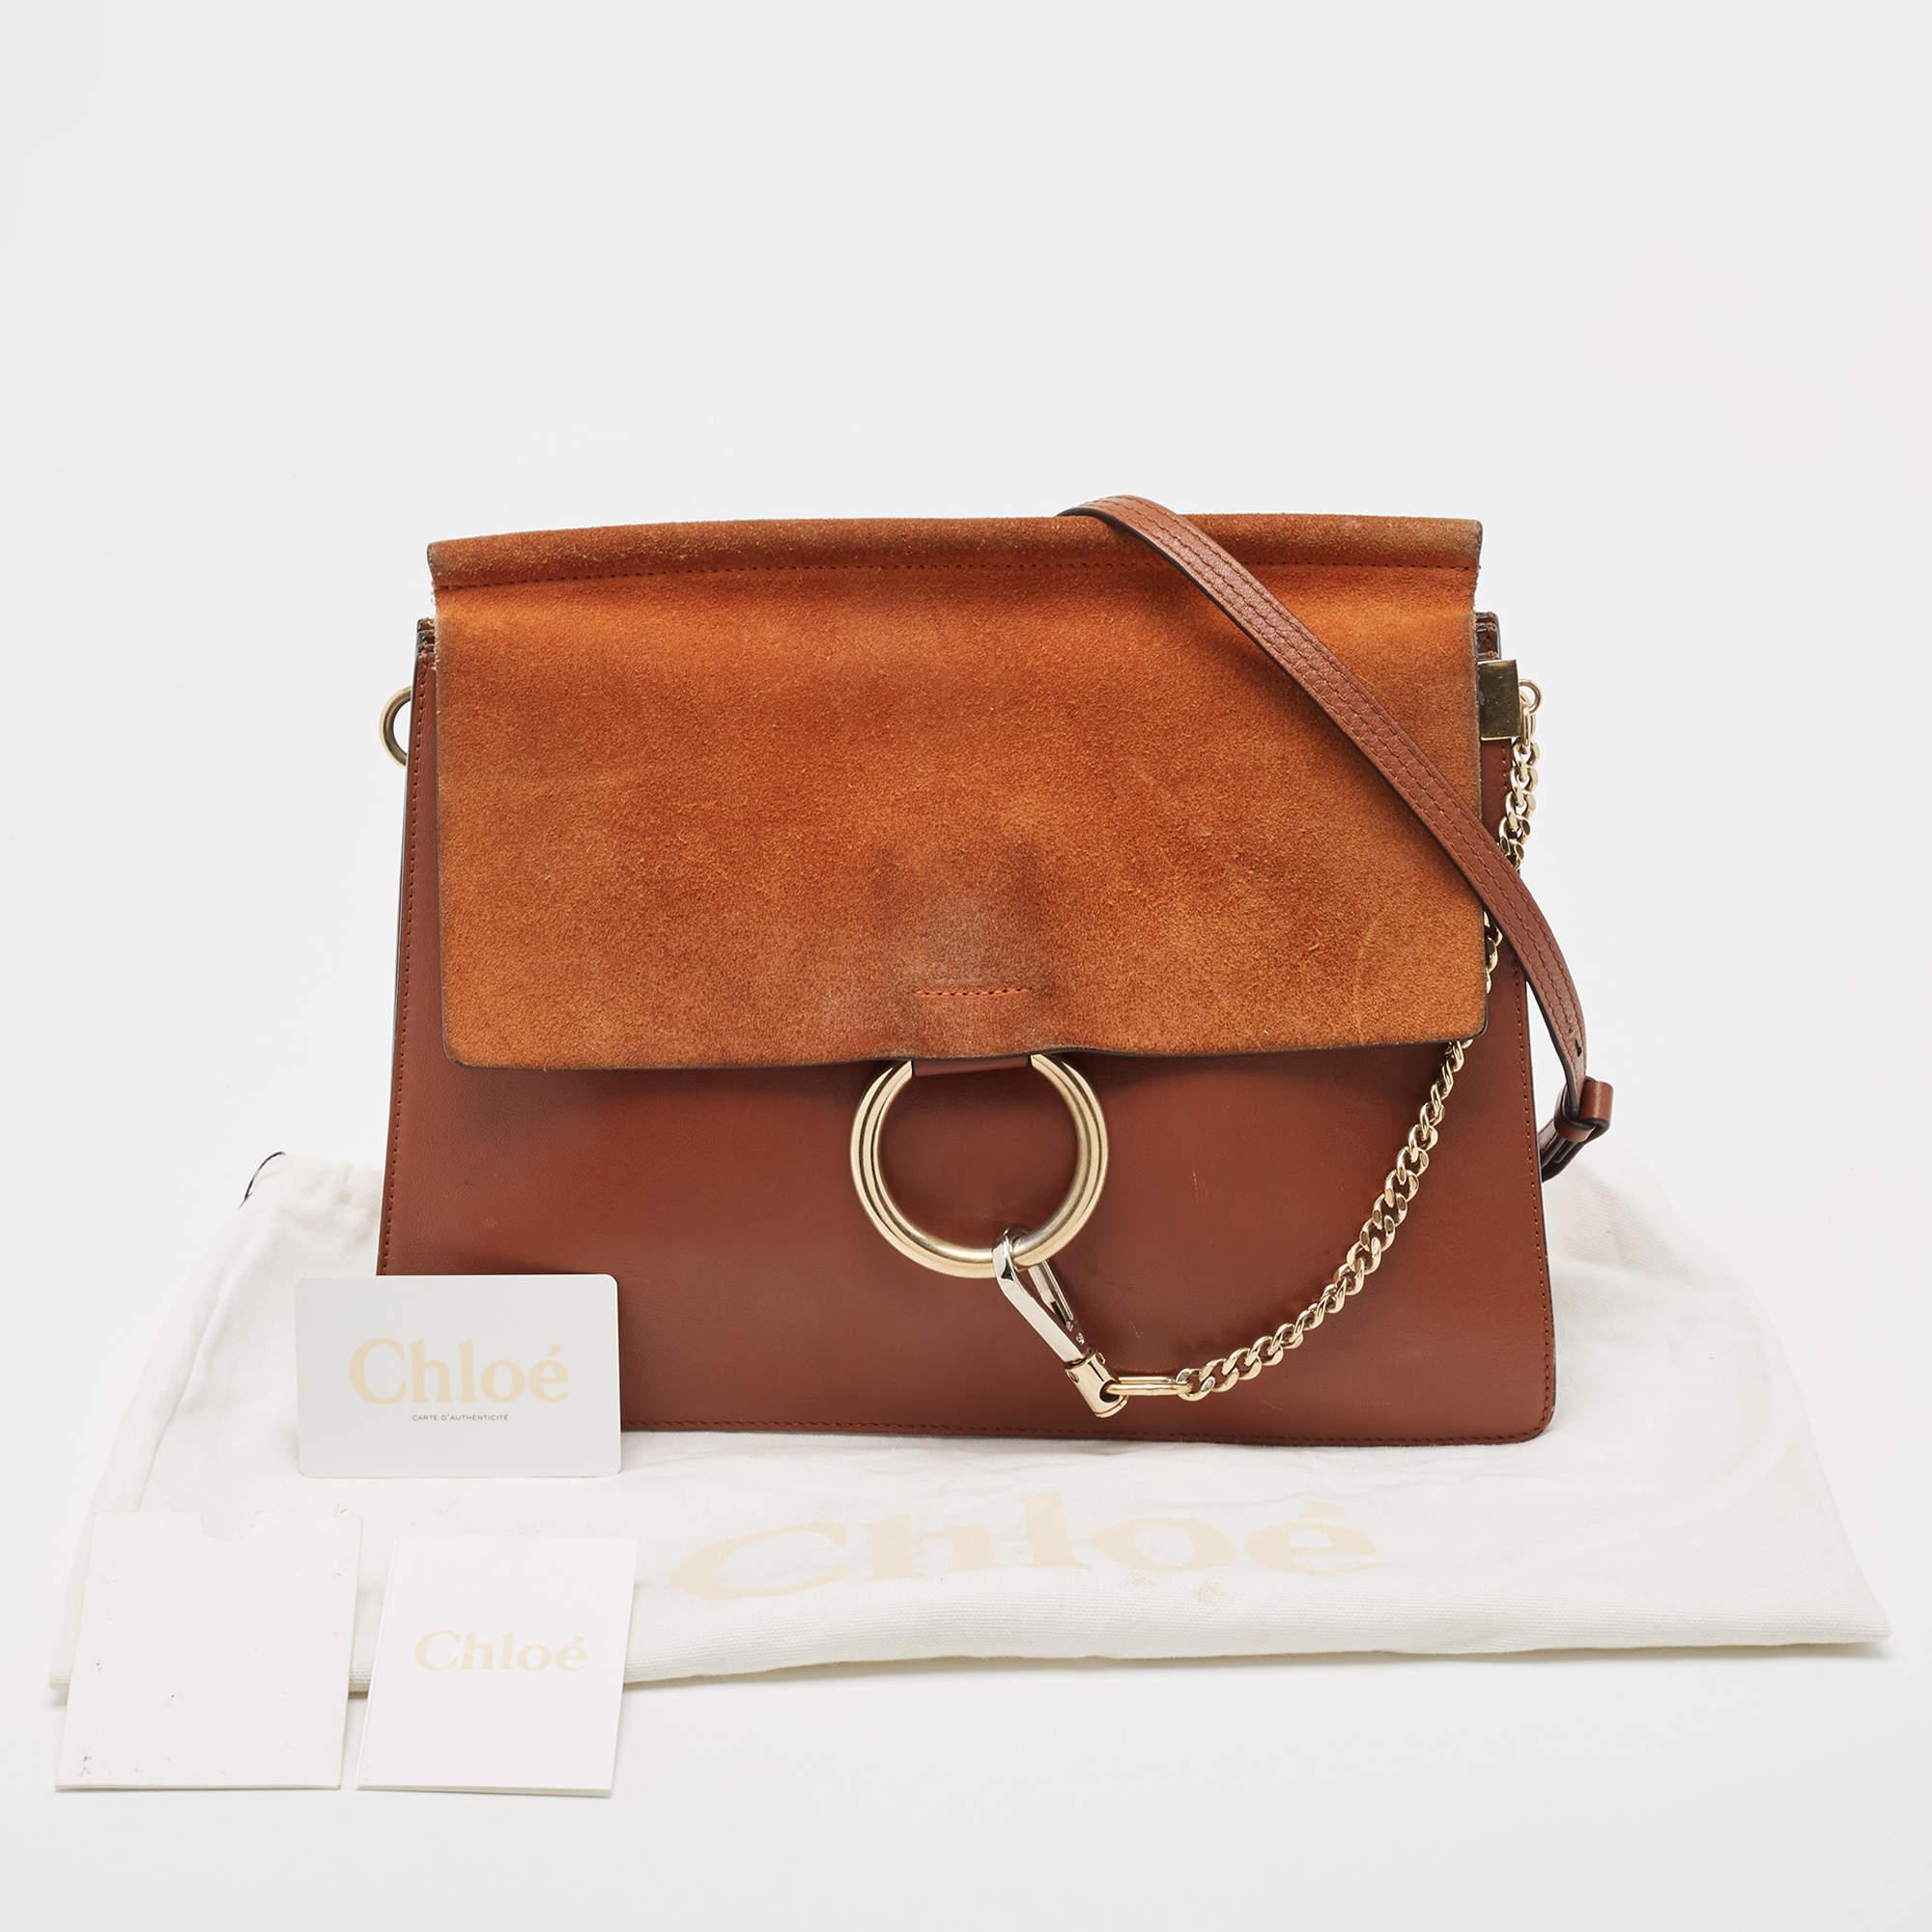 Chloe Brown Leather and Suede Medium Faye Shoulder Bag For Sale 4